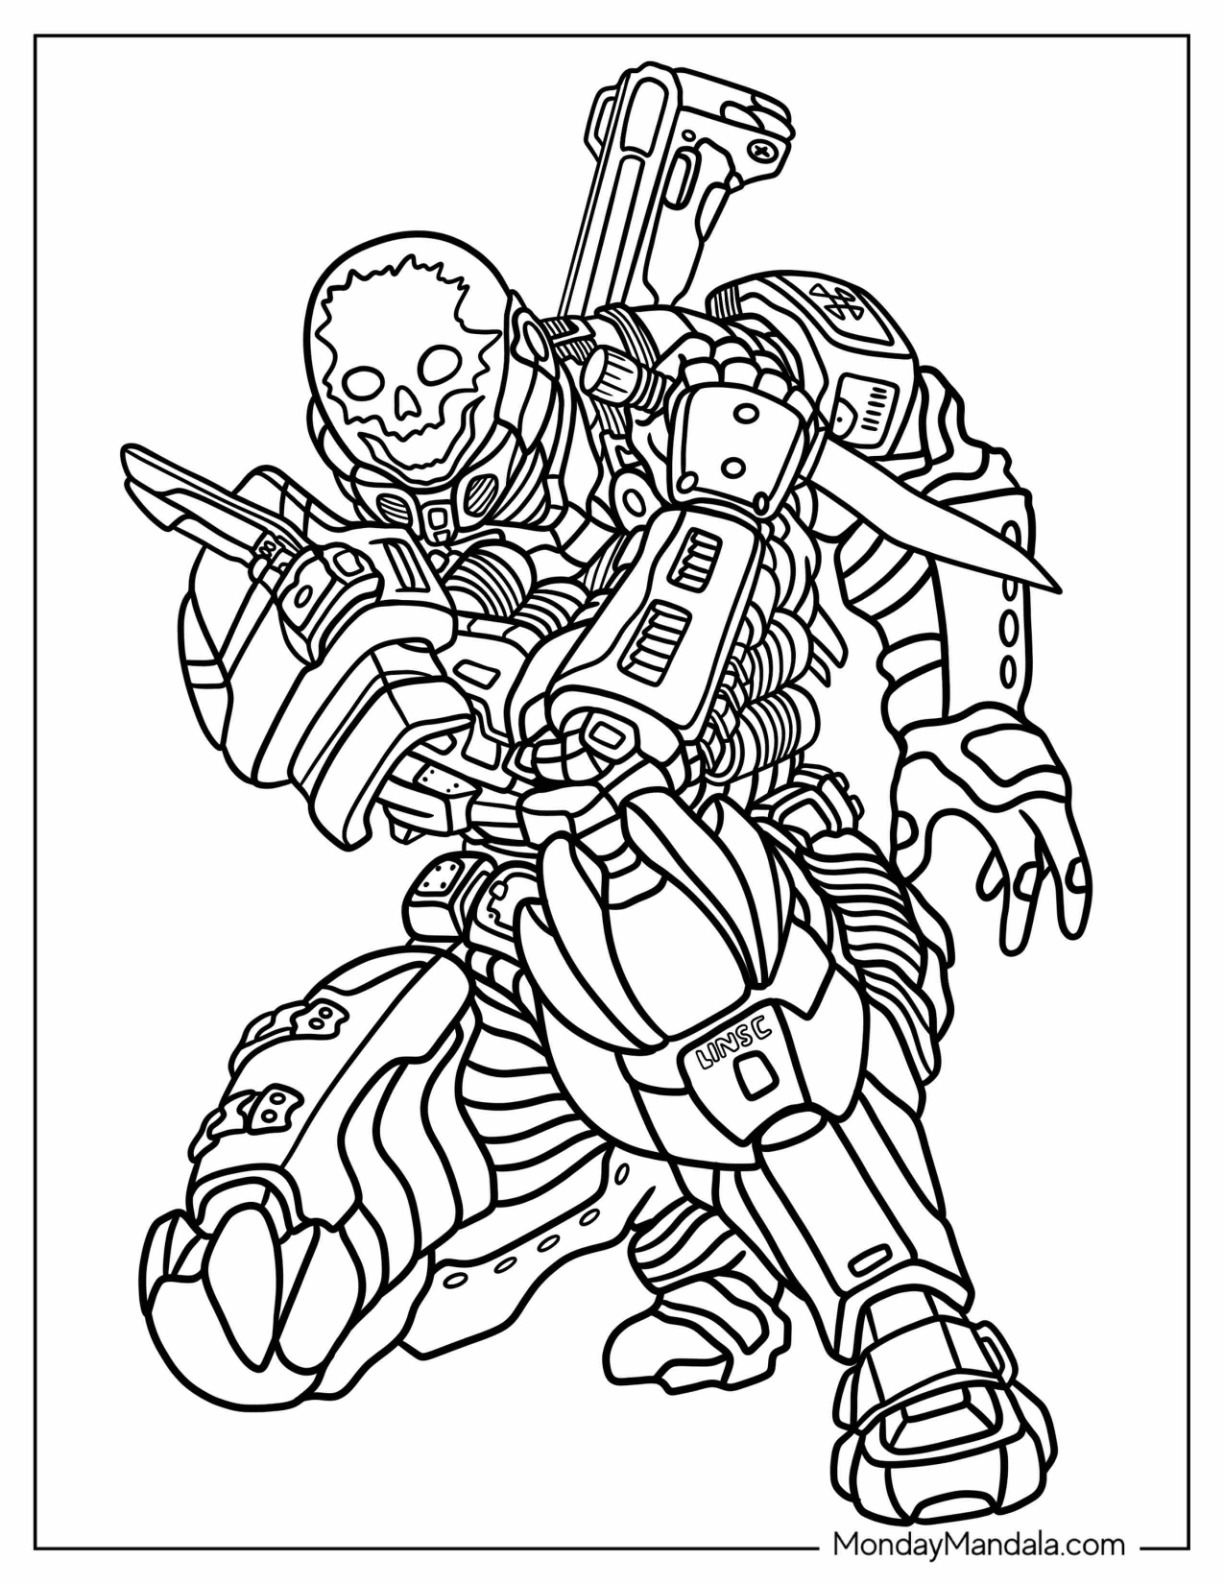 Halo coloring pages free pdf printables